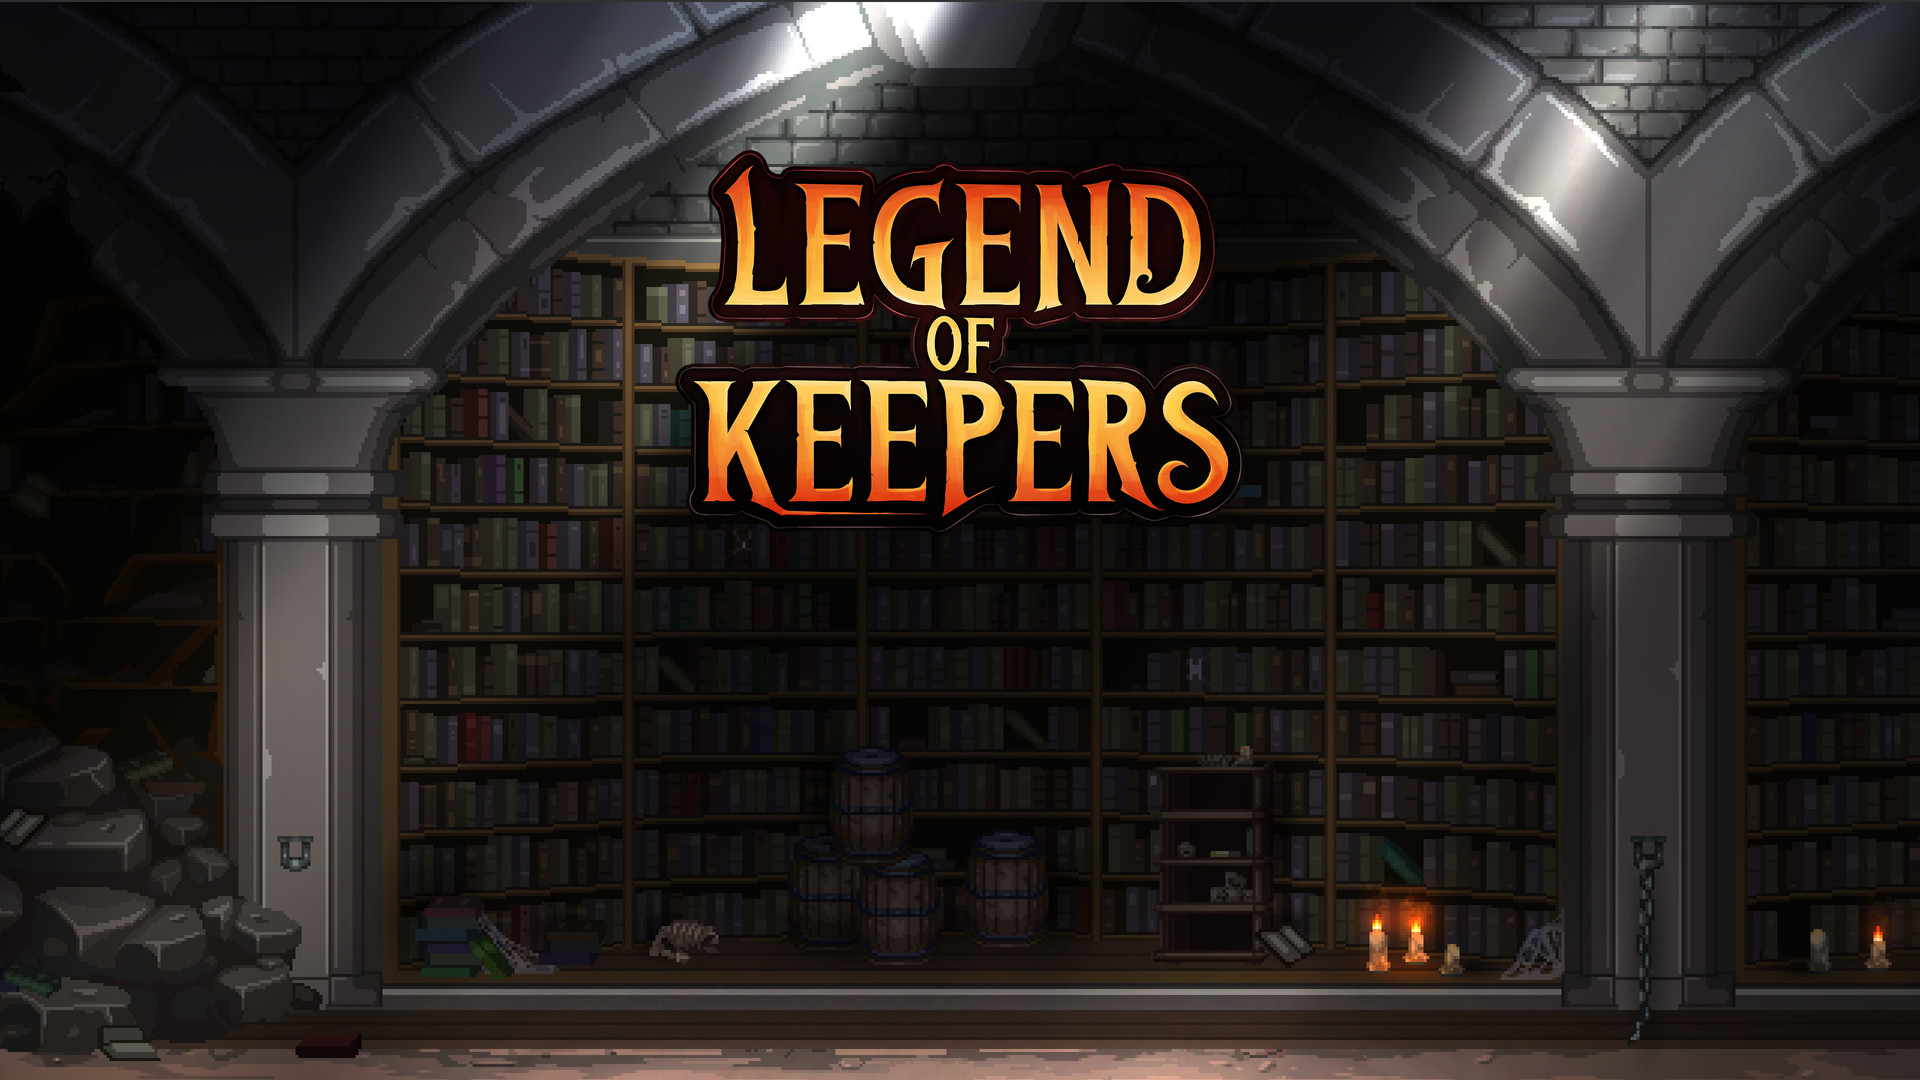 legend of keepers promotion